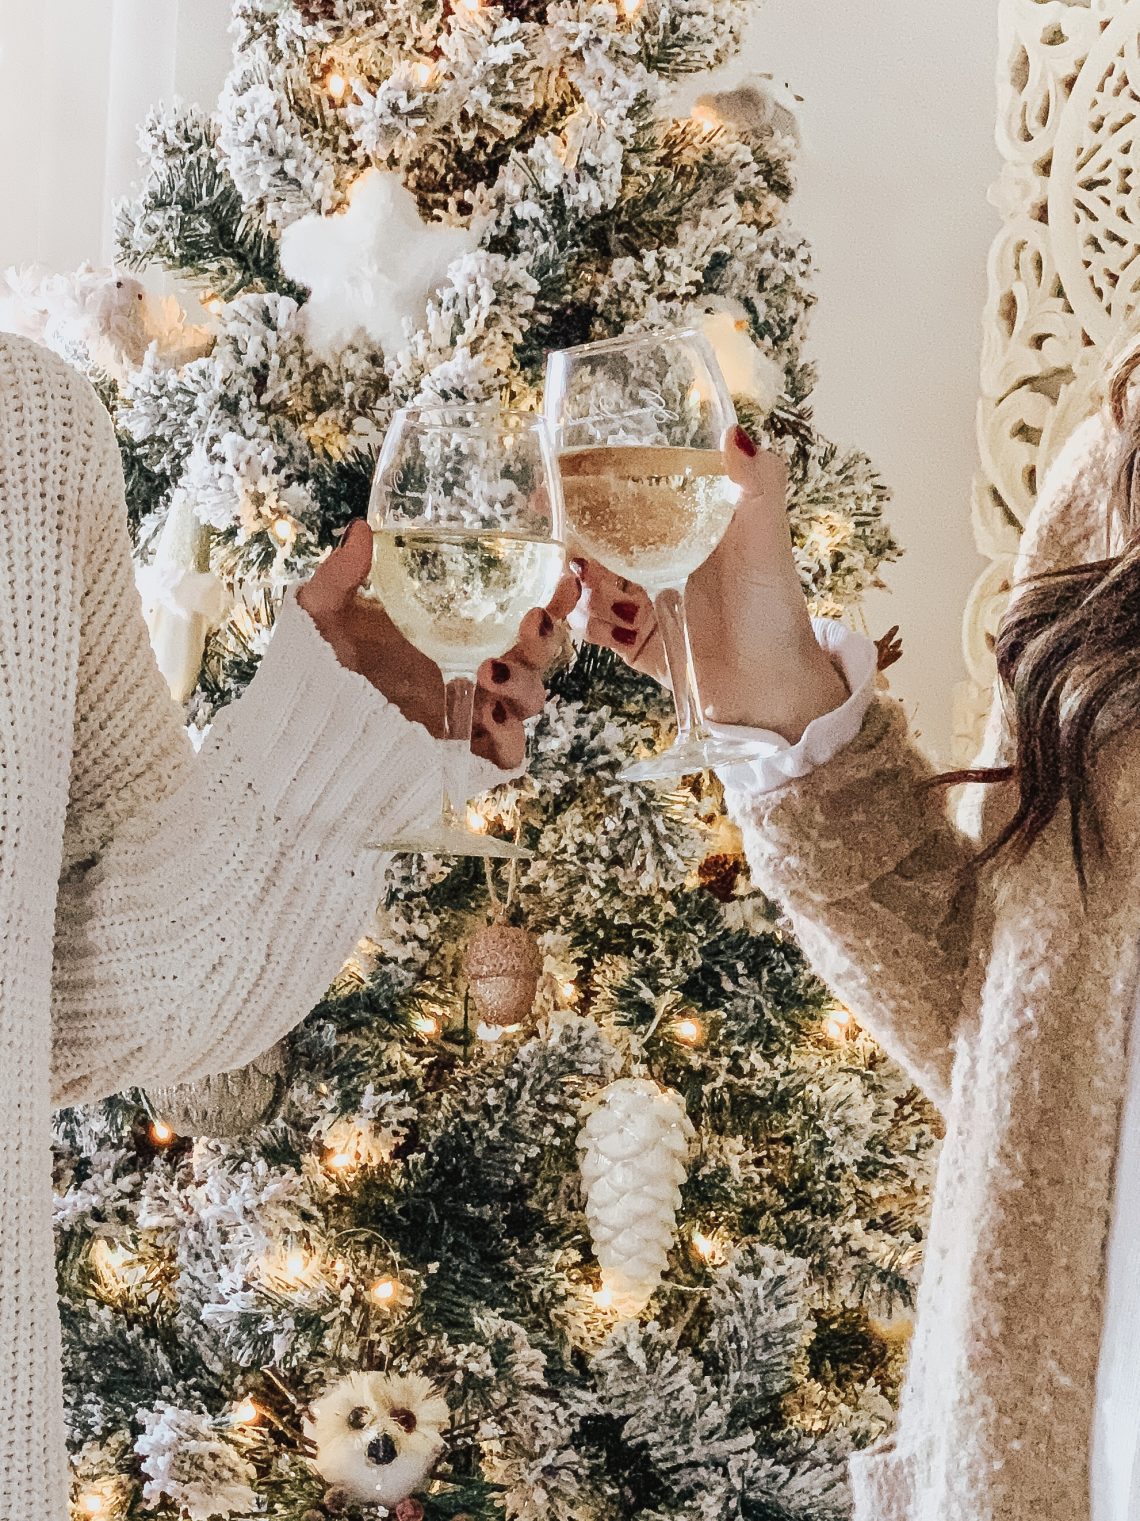 How To Plan A GLAM Girls' Night In - Holiday Style - Oh So Glam